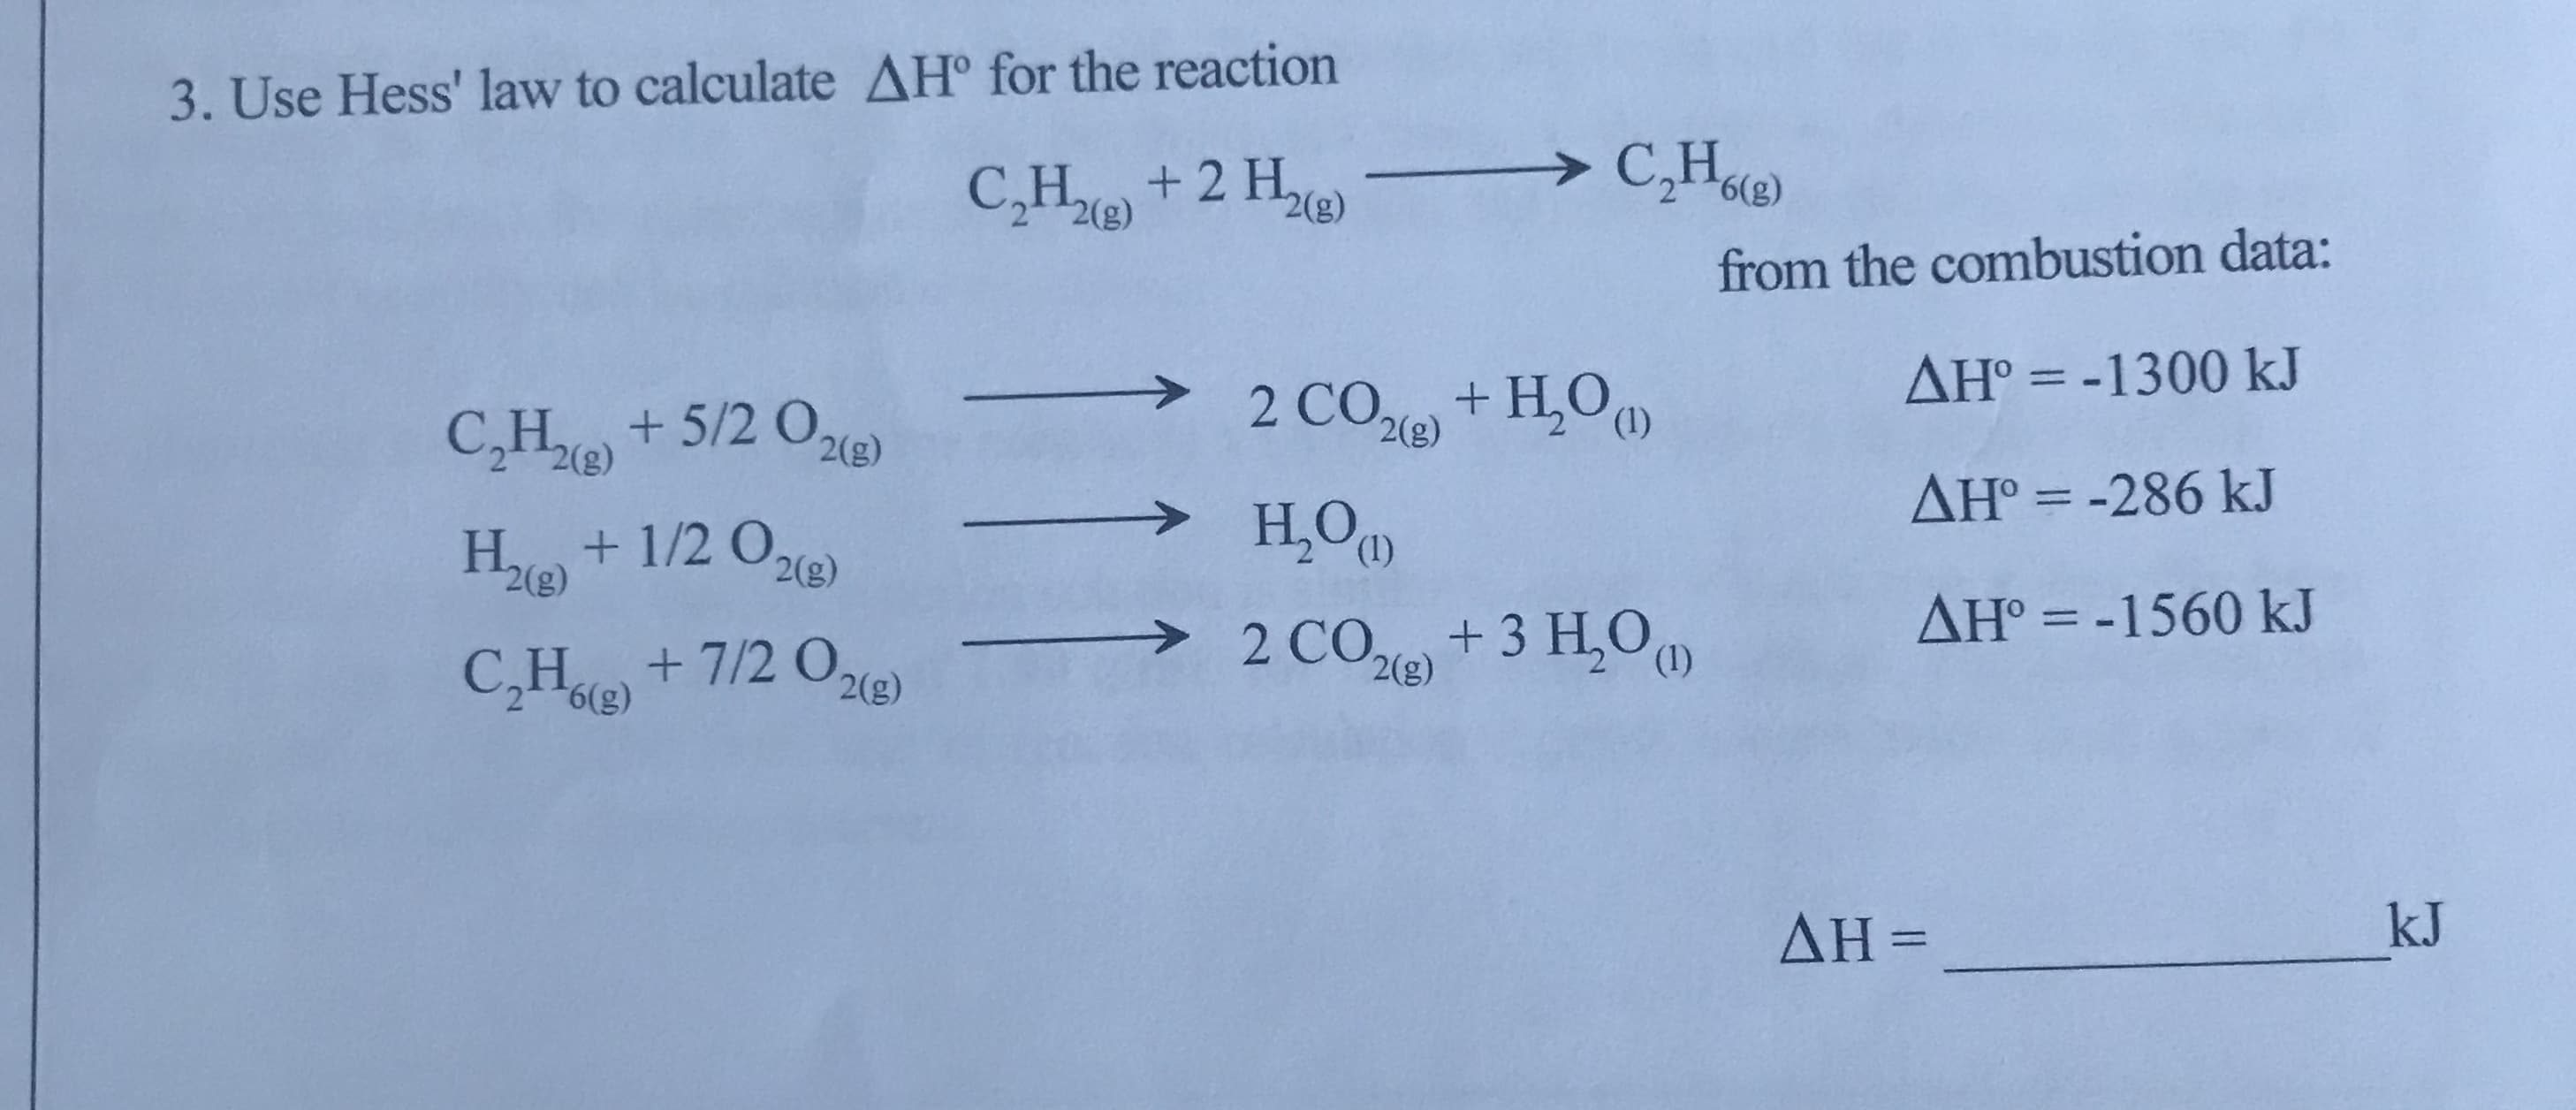 3. Use Hess' law to calculate AH° for the reaction
+2 H,
2(g)
> C,He)
from the combustion data:
AH° = -1300 kJ
C,H2(e)
+ 5/2 O2e)
2 CO+ H,O
2(g)
2(g)
>
H,O
AH° = -286 kJ
Ho + 1/2 0,
2(g)
2(g)
> 2 CO,+3 H,O
AH° = -1560 kJ
%3D
C,H+7/2 O,21e)
2(g)
(1)
ΔΗ -
kJ
